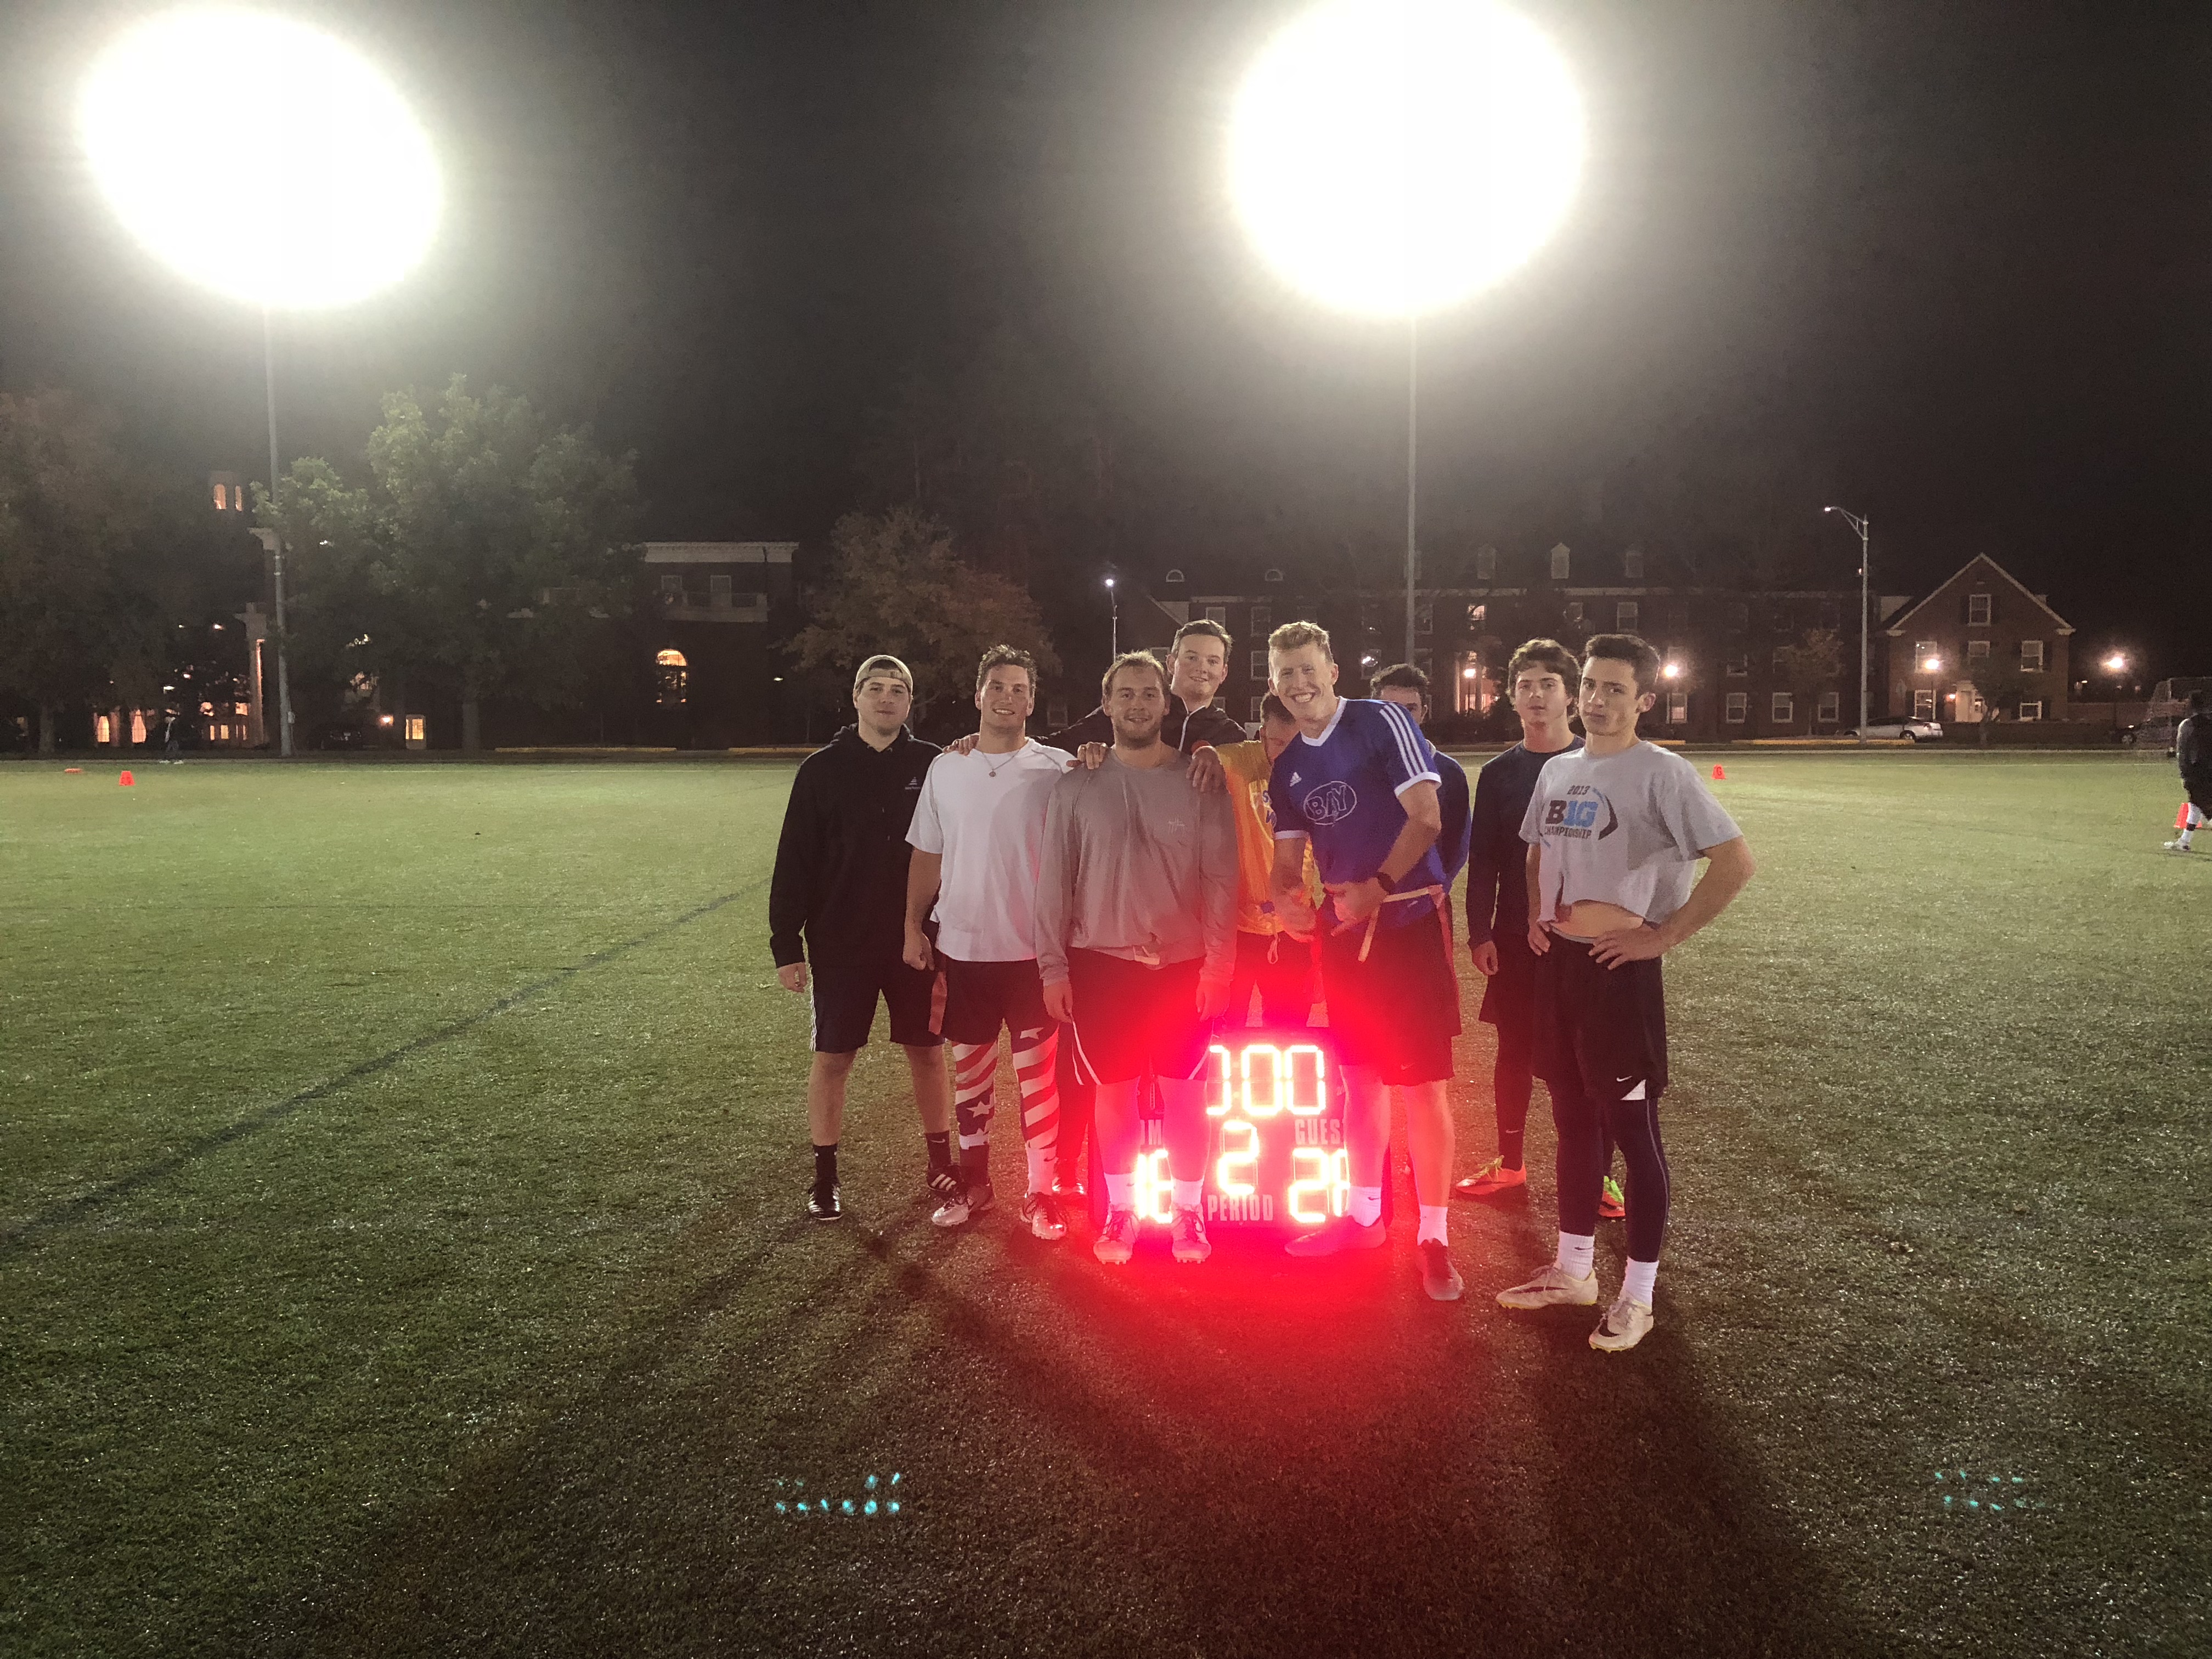  Flag football runner up team poses for a photo by the final game scoreboard.